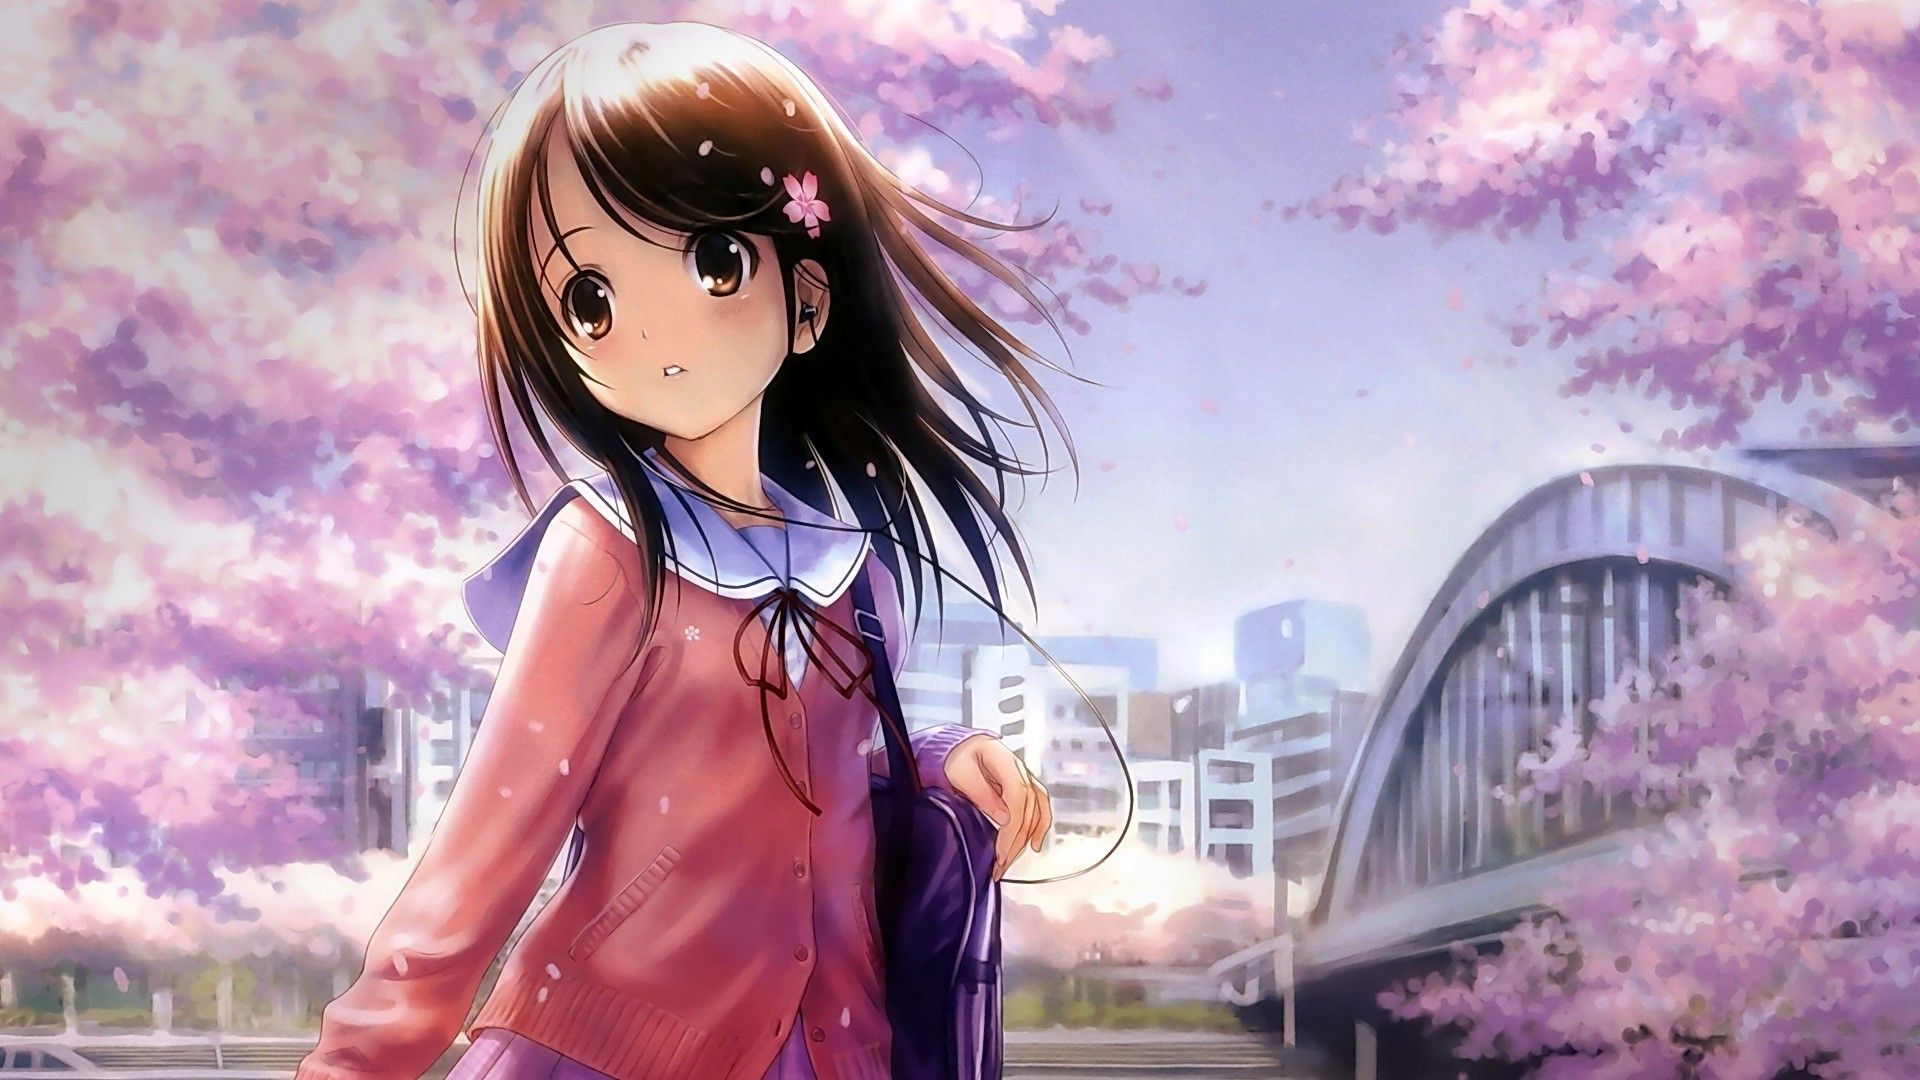 Cute Anime Wallpapers